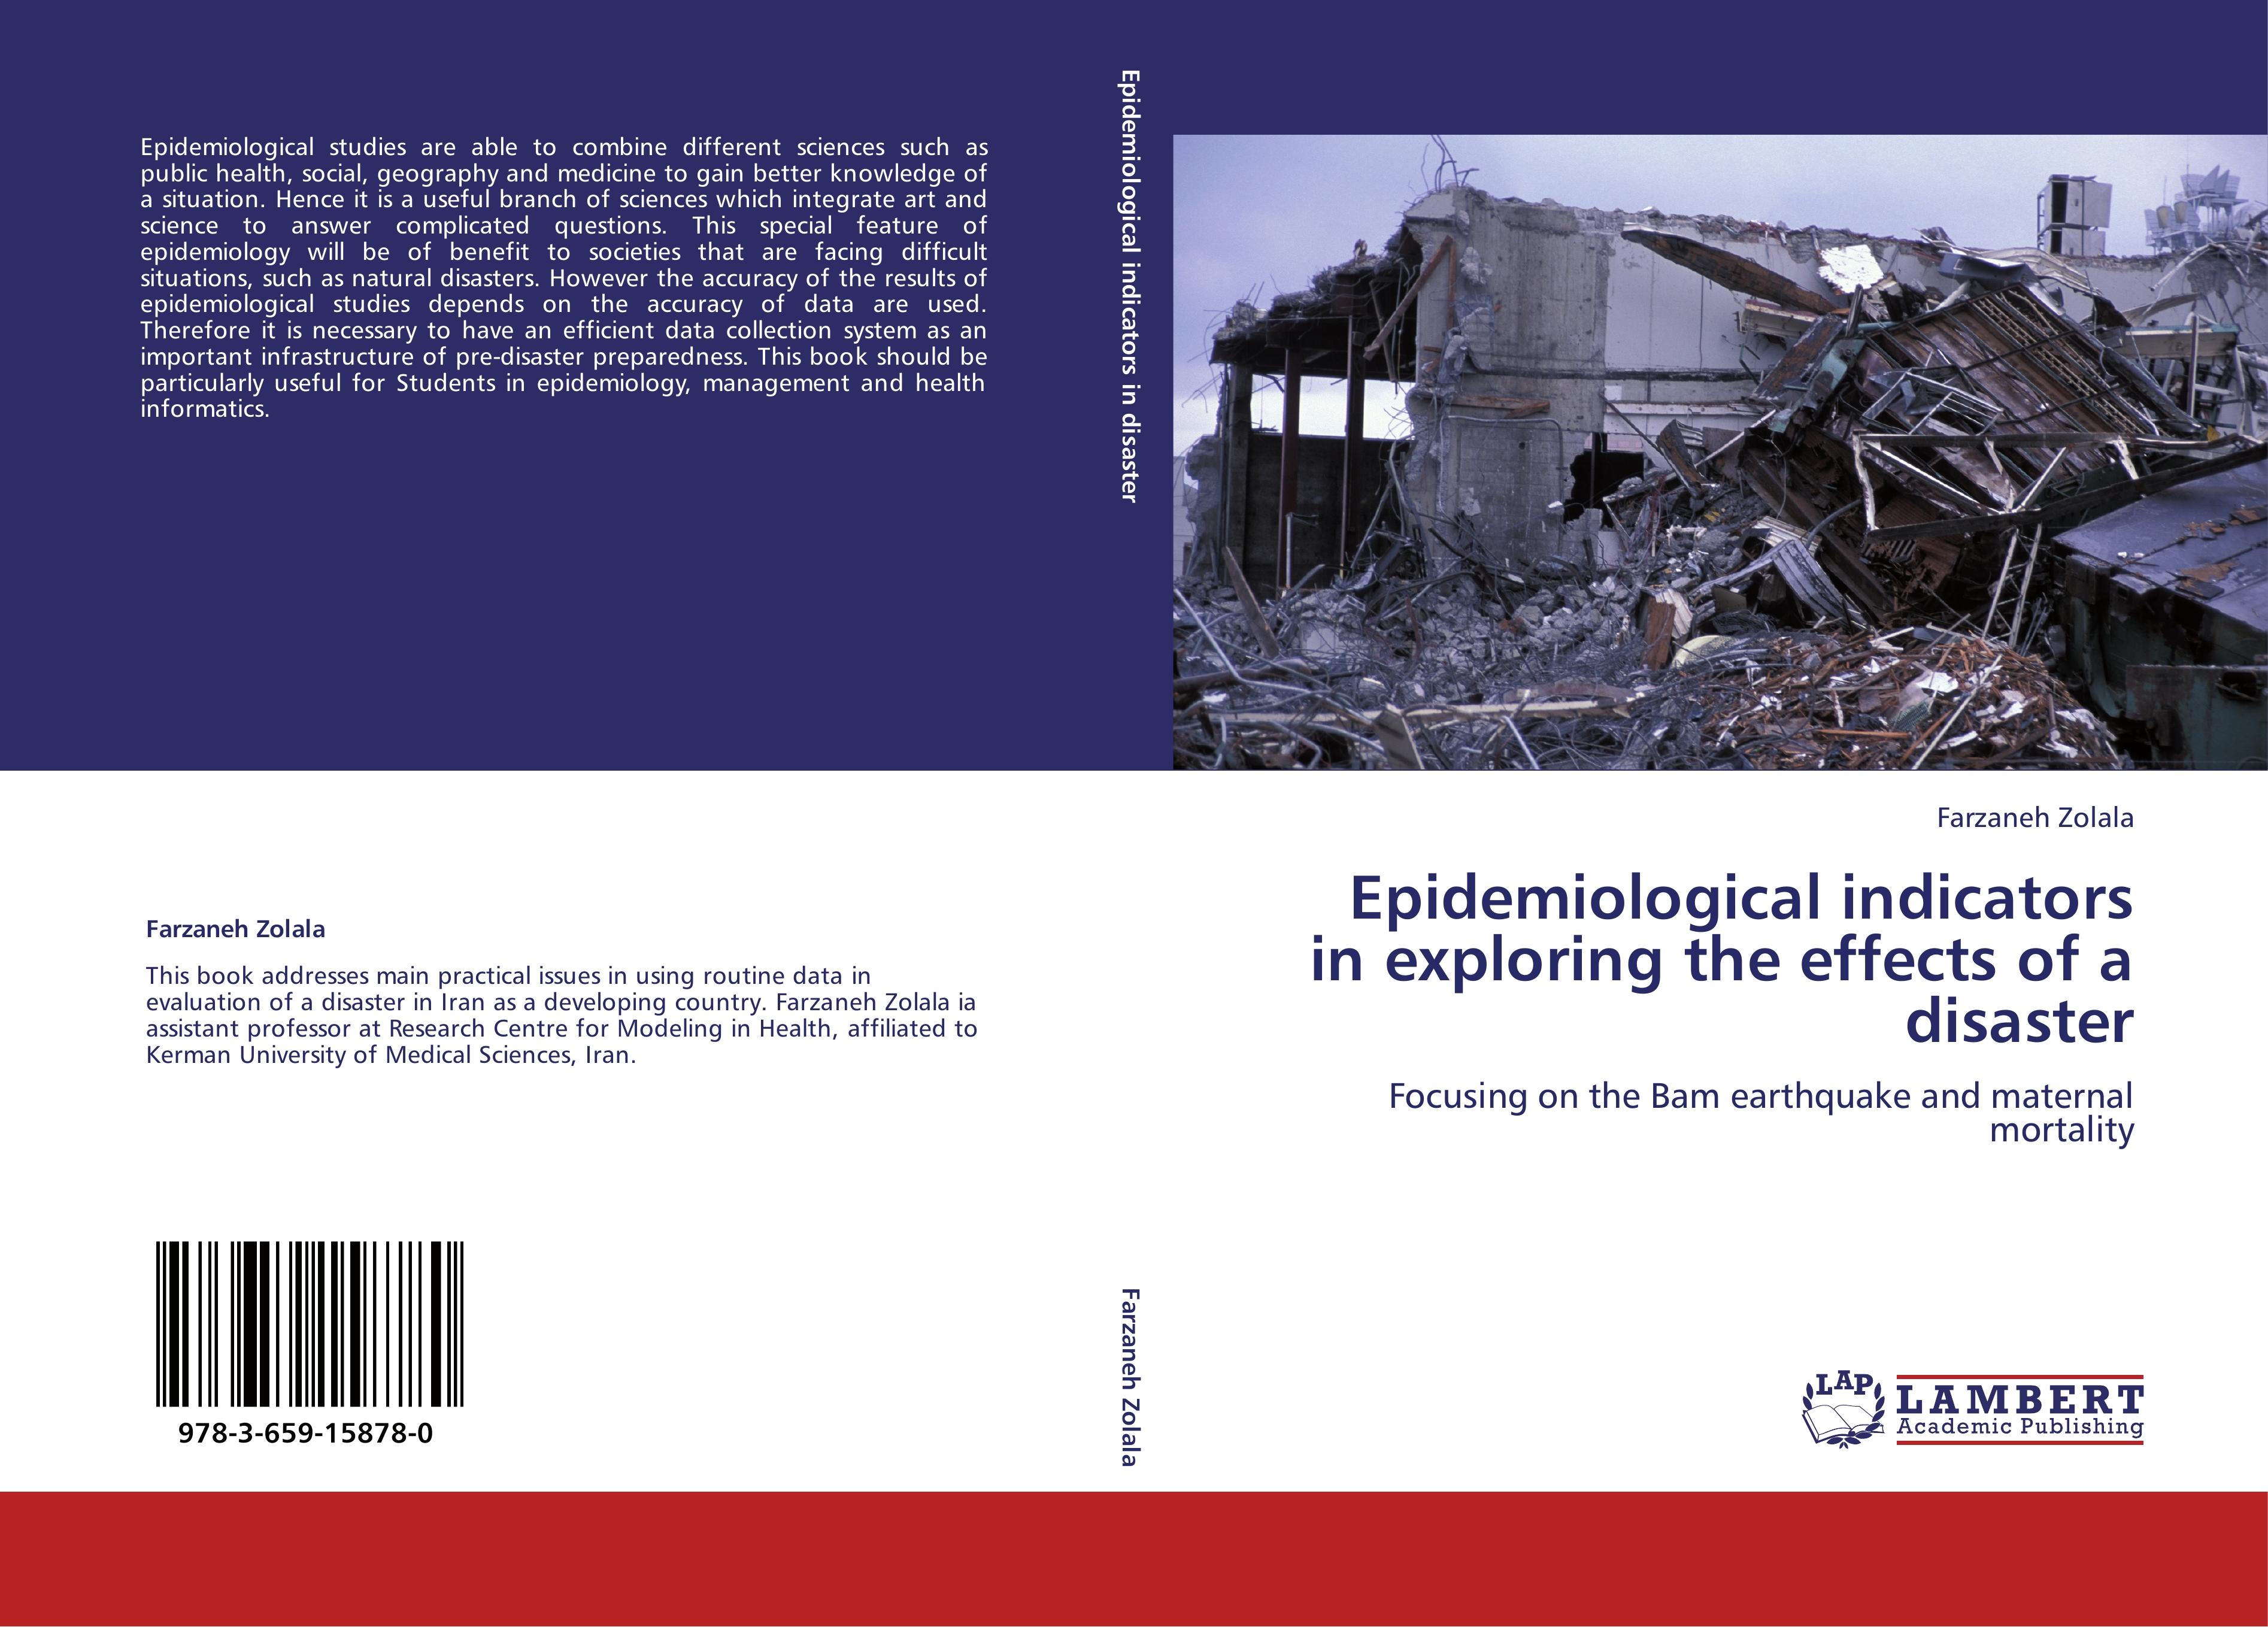 Epidemiological indicators in exploring the effects of a disaster - Farzaneh Zolala